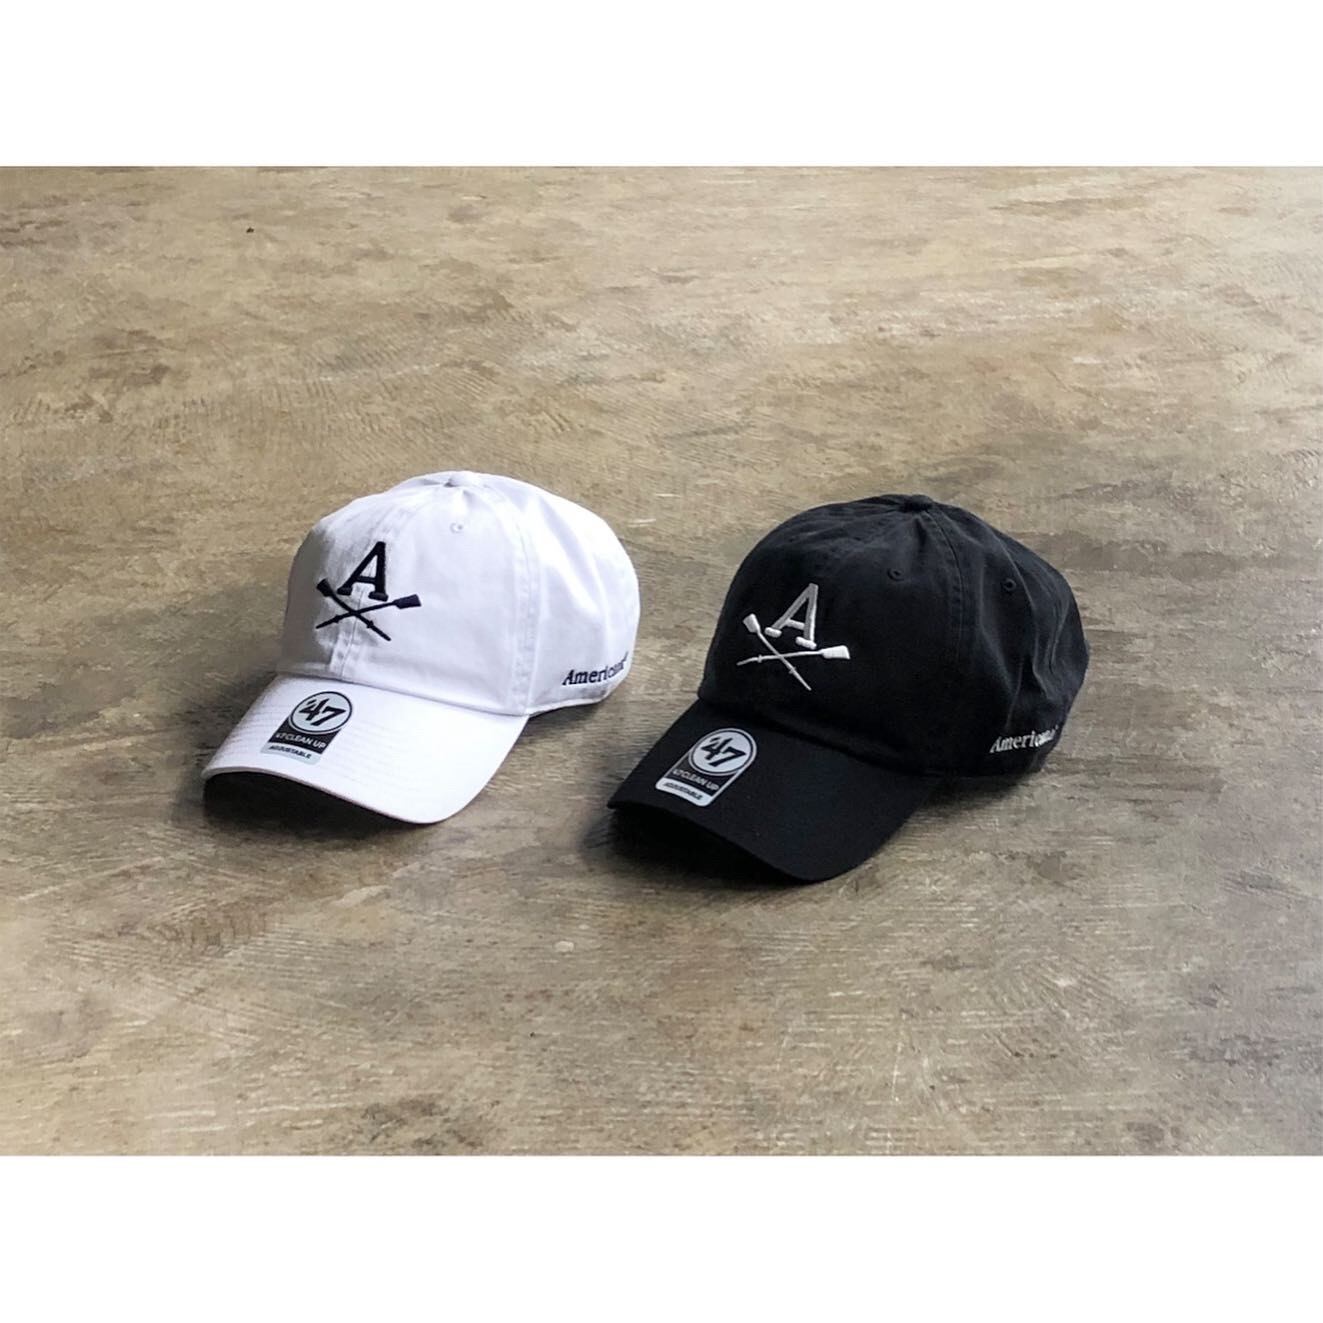 AMERICANA(アメリカーナ) 『AMERICANA×'47』'47 Clean Up Logo Embroidery Cap  AUTHENTIC Life Store